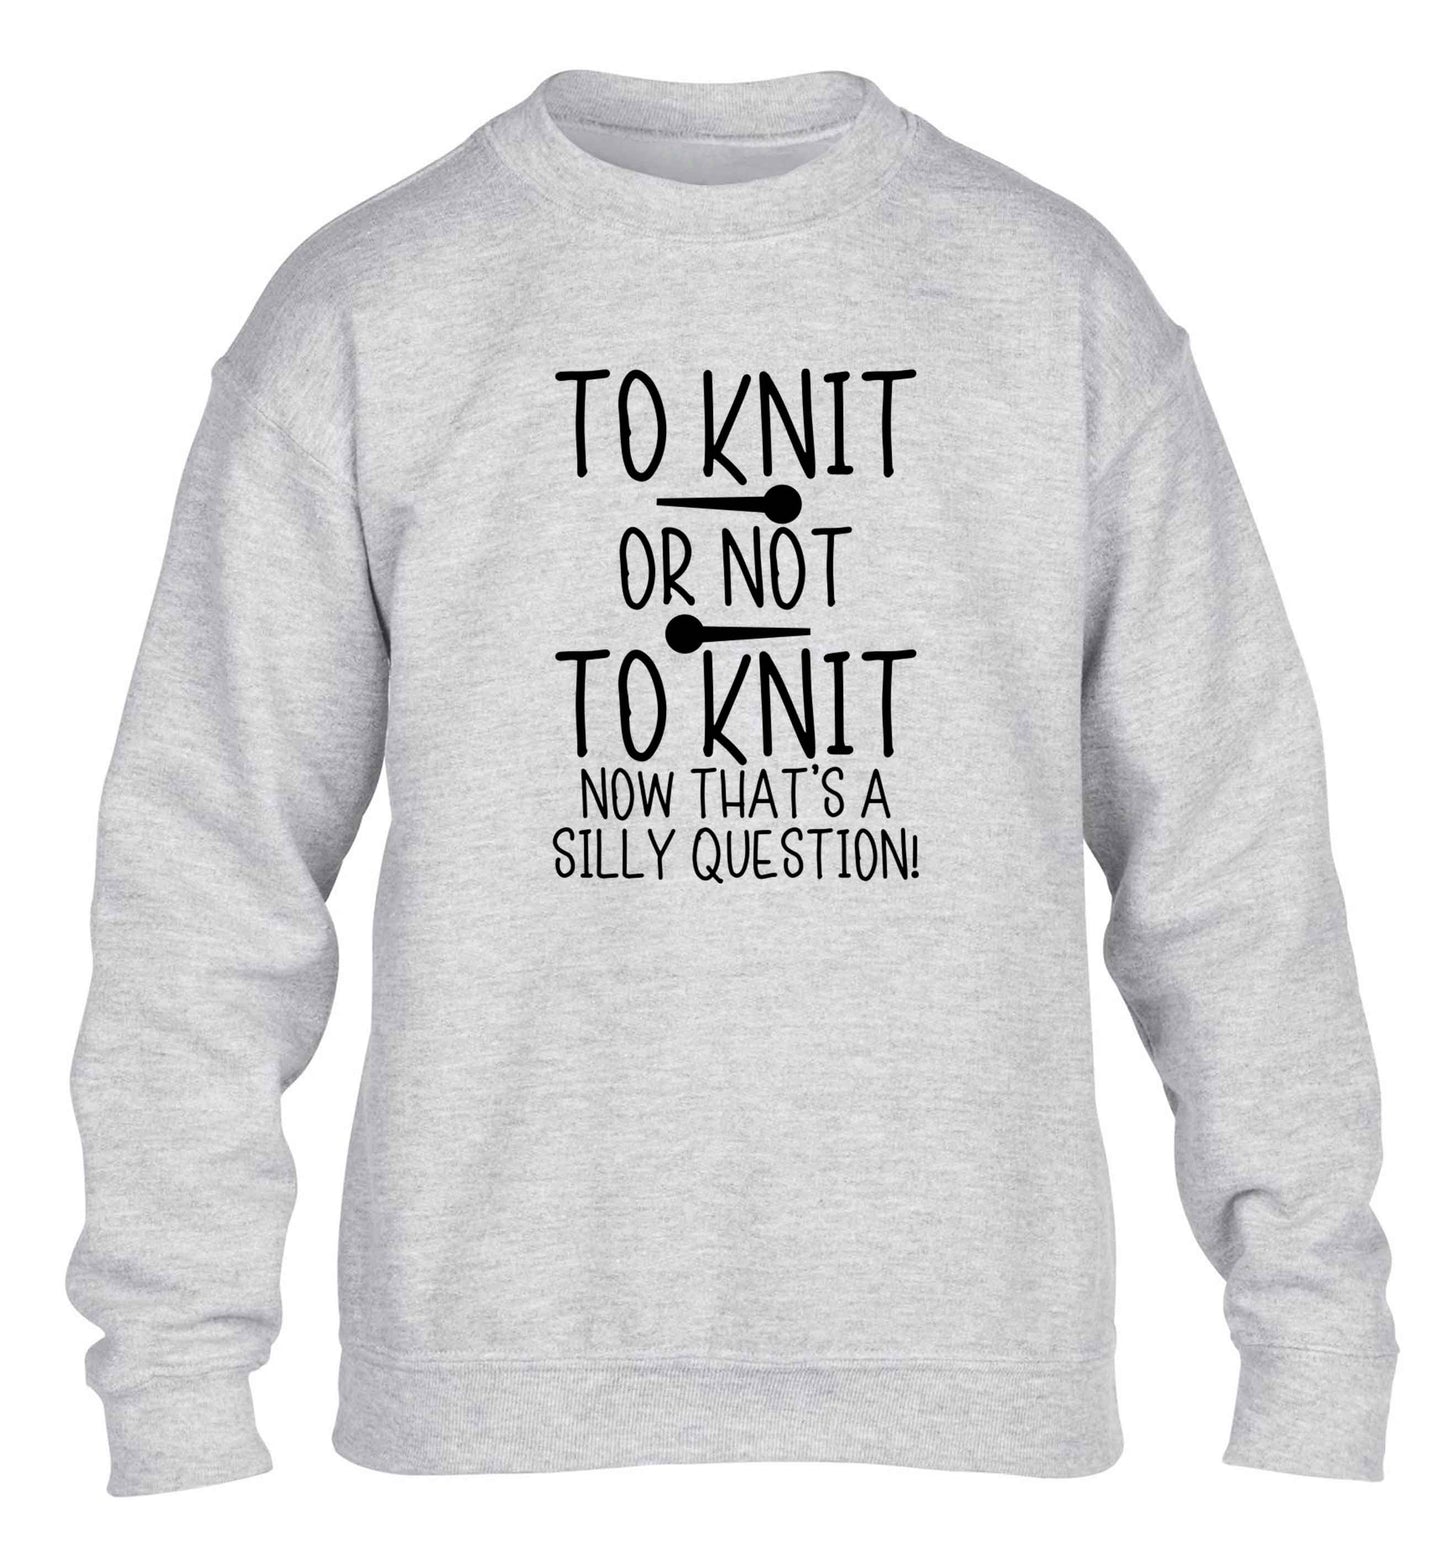 To knit or not to knit now that's a silly question children's grey sweater 12-13 Years